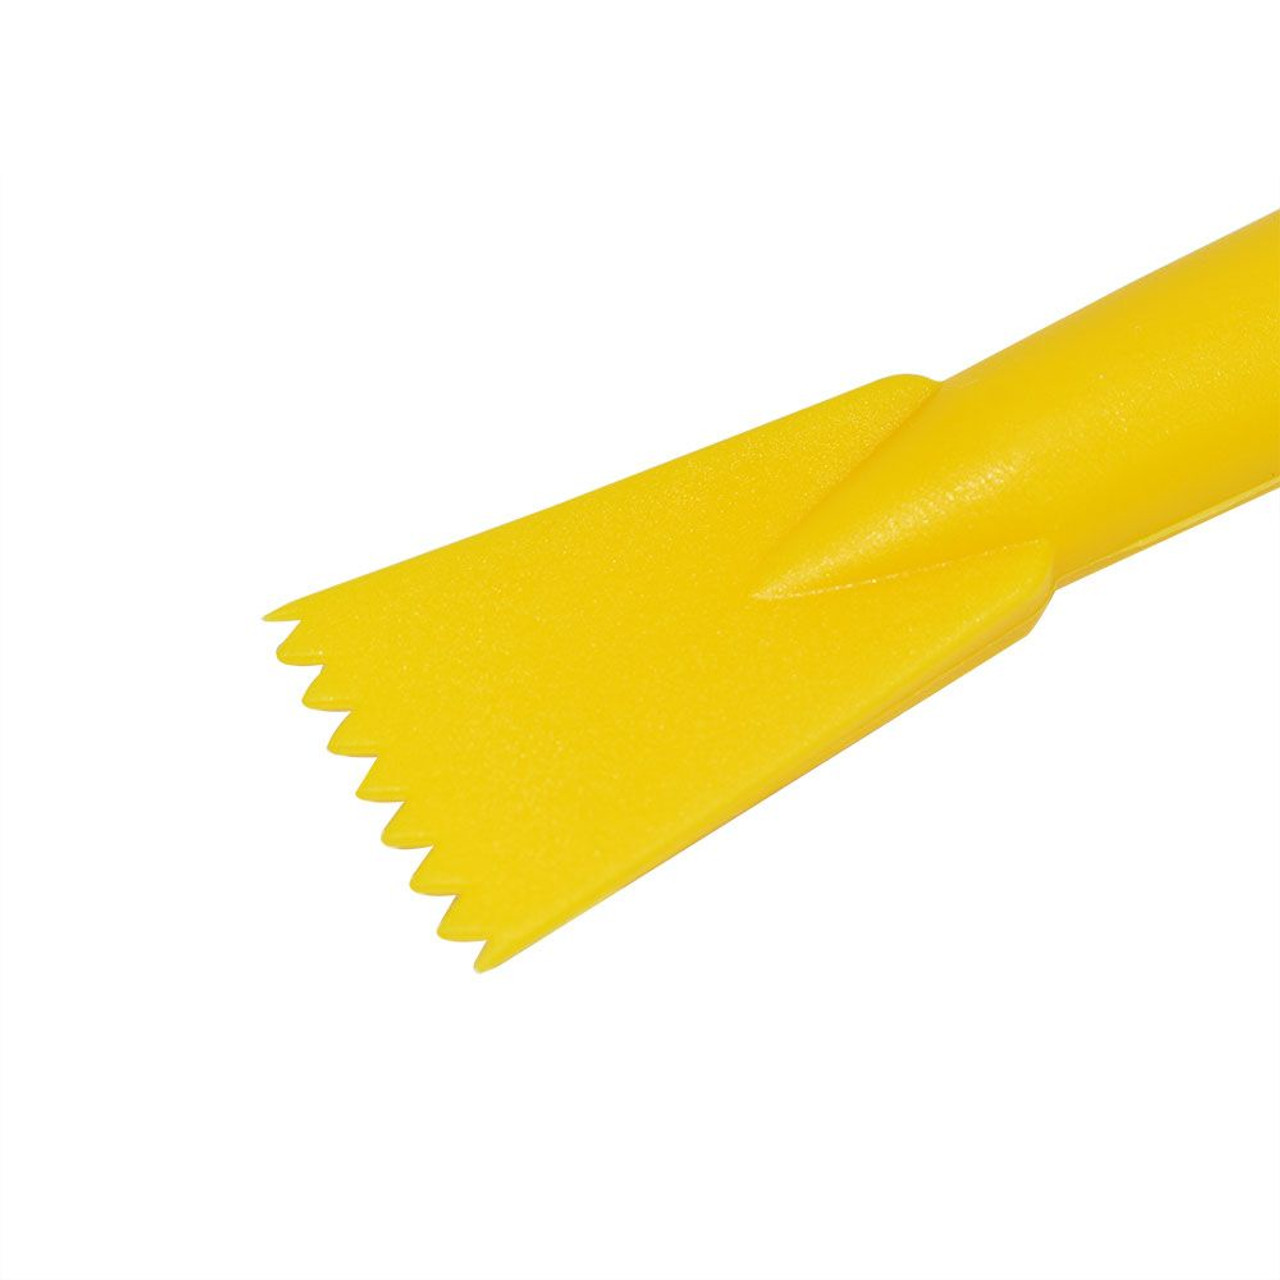 Big Horn 19031 Silicone Glue Brush with Comb Edge Blade Applicator